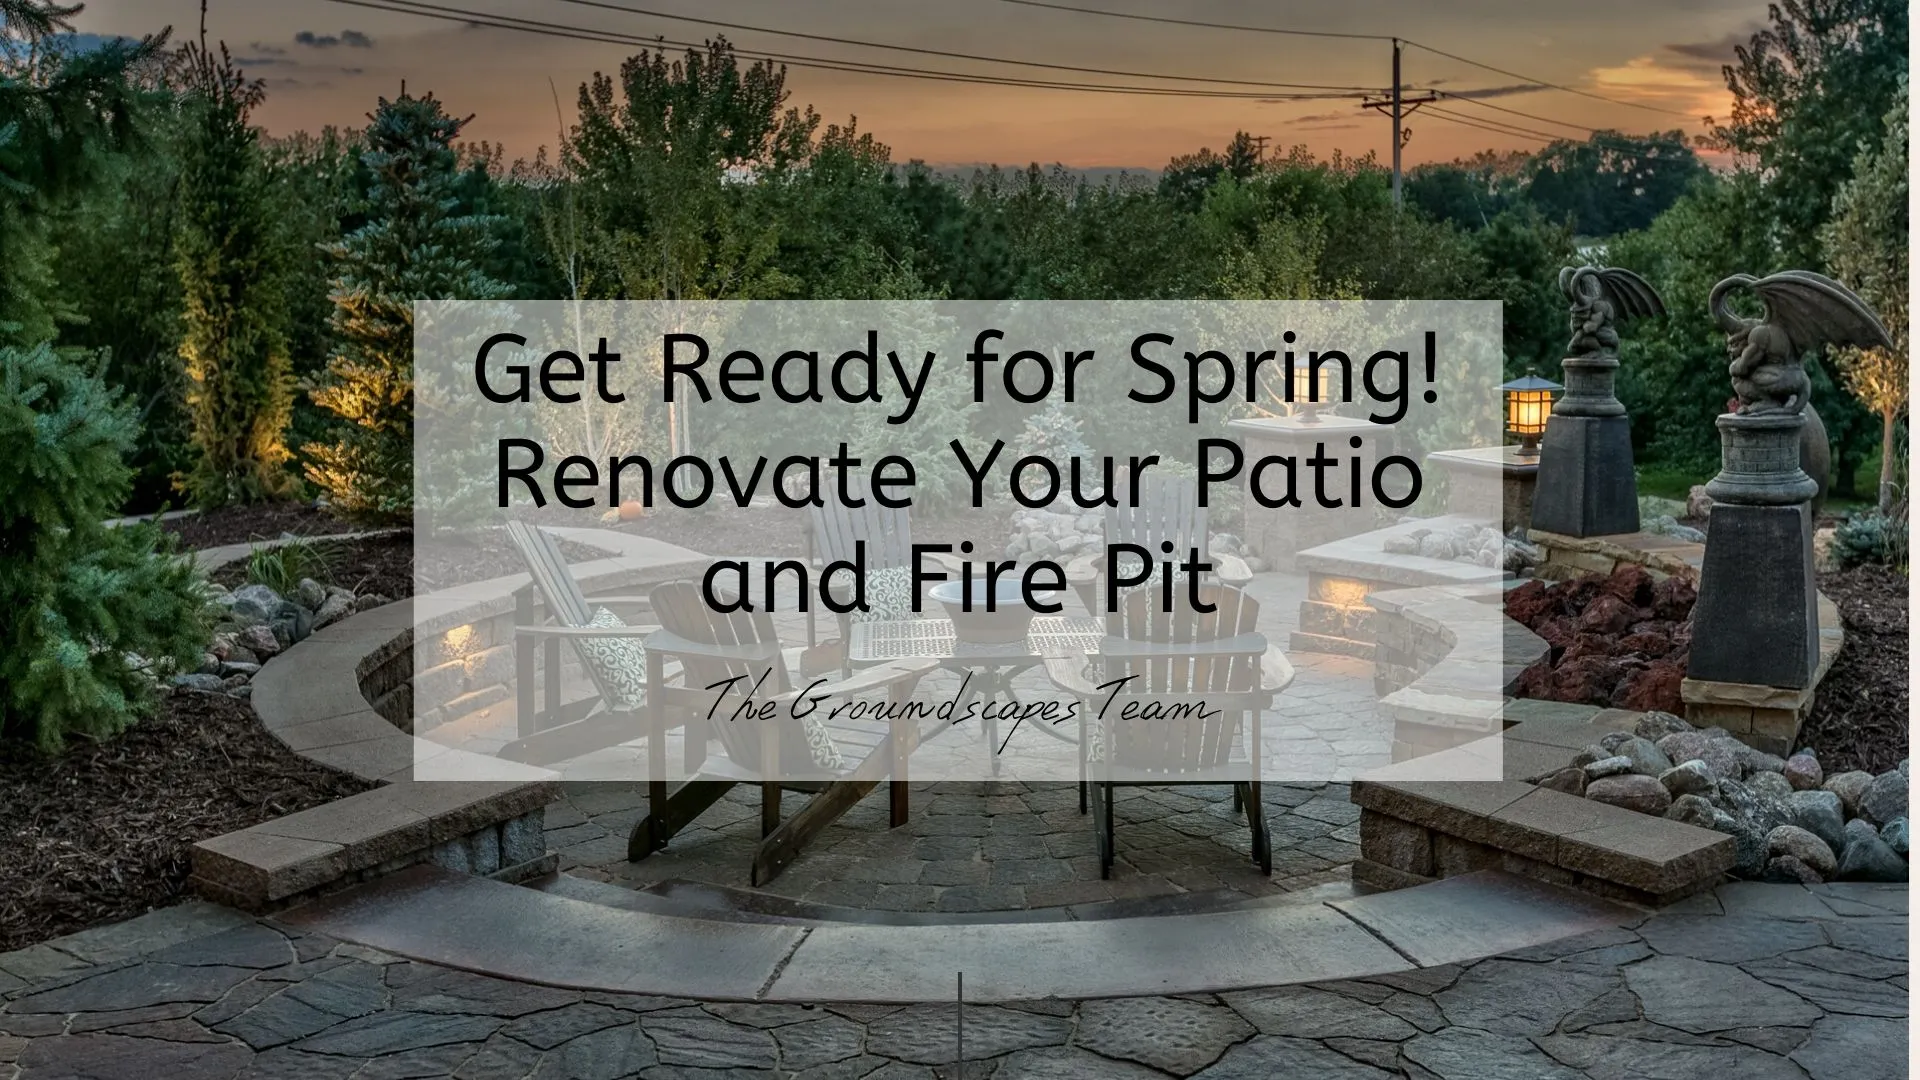 Get Ready for Spring! Renovate Your Patio and Fire Pit